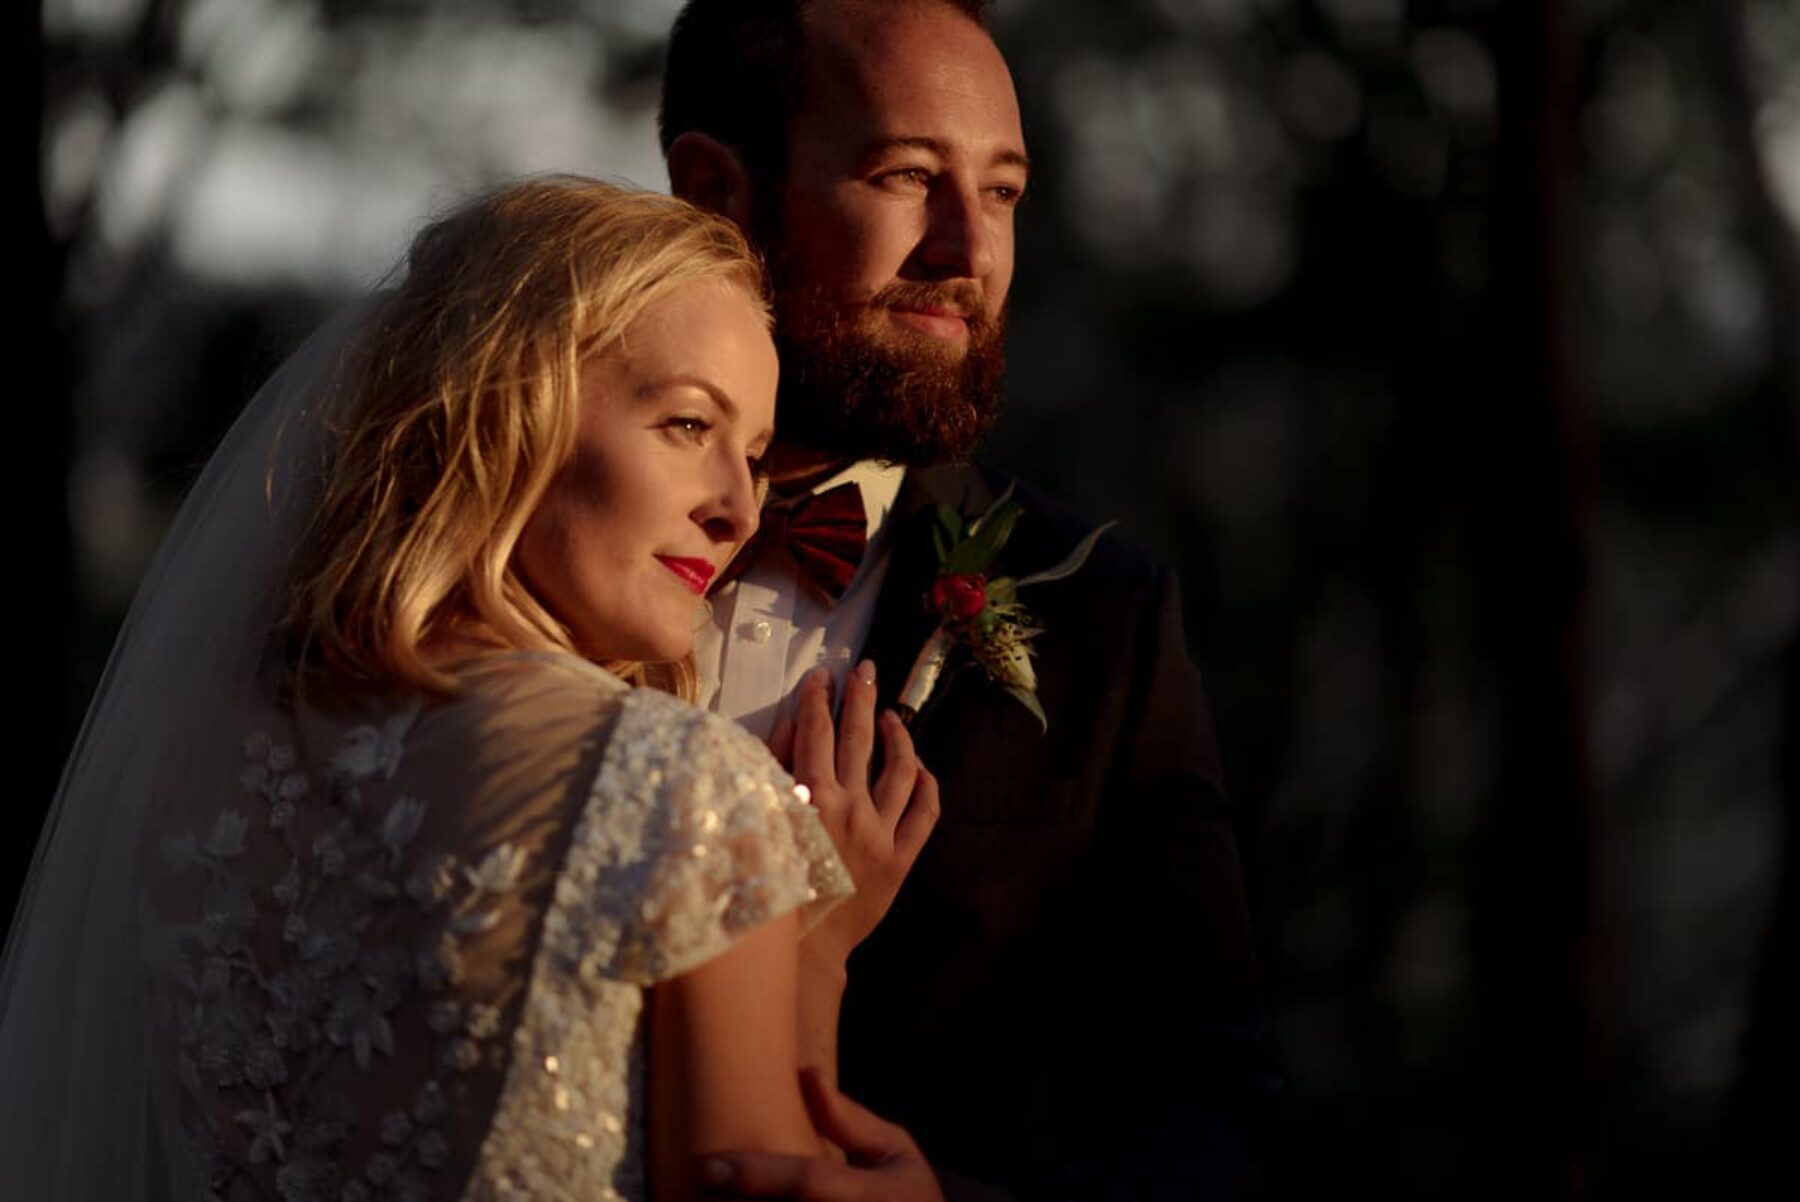 Winter forest wedding, Terrigal NSW / Photography by Keelan Christopher